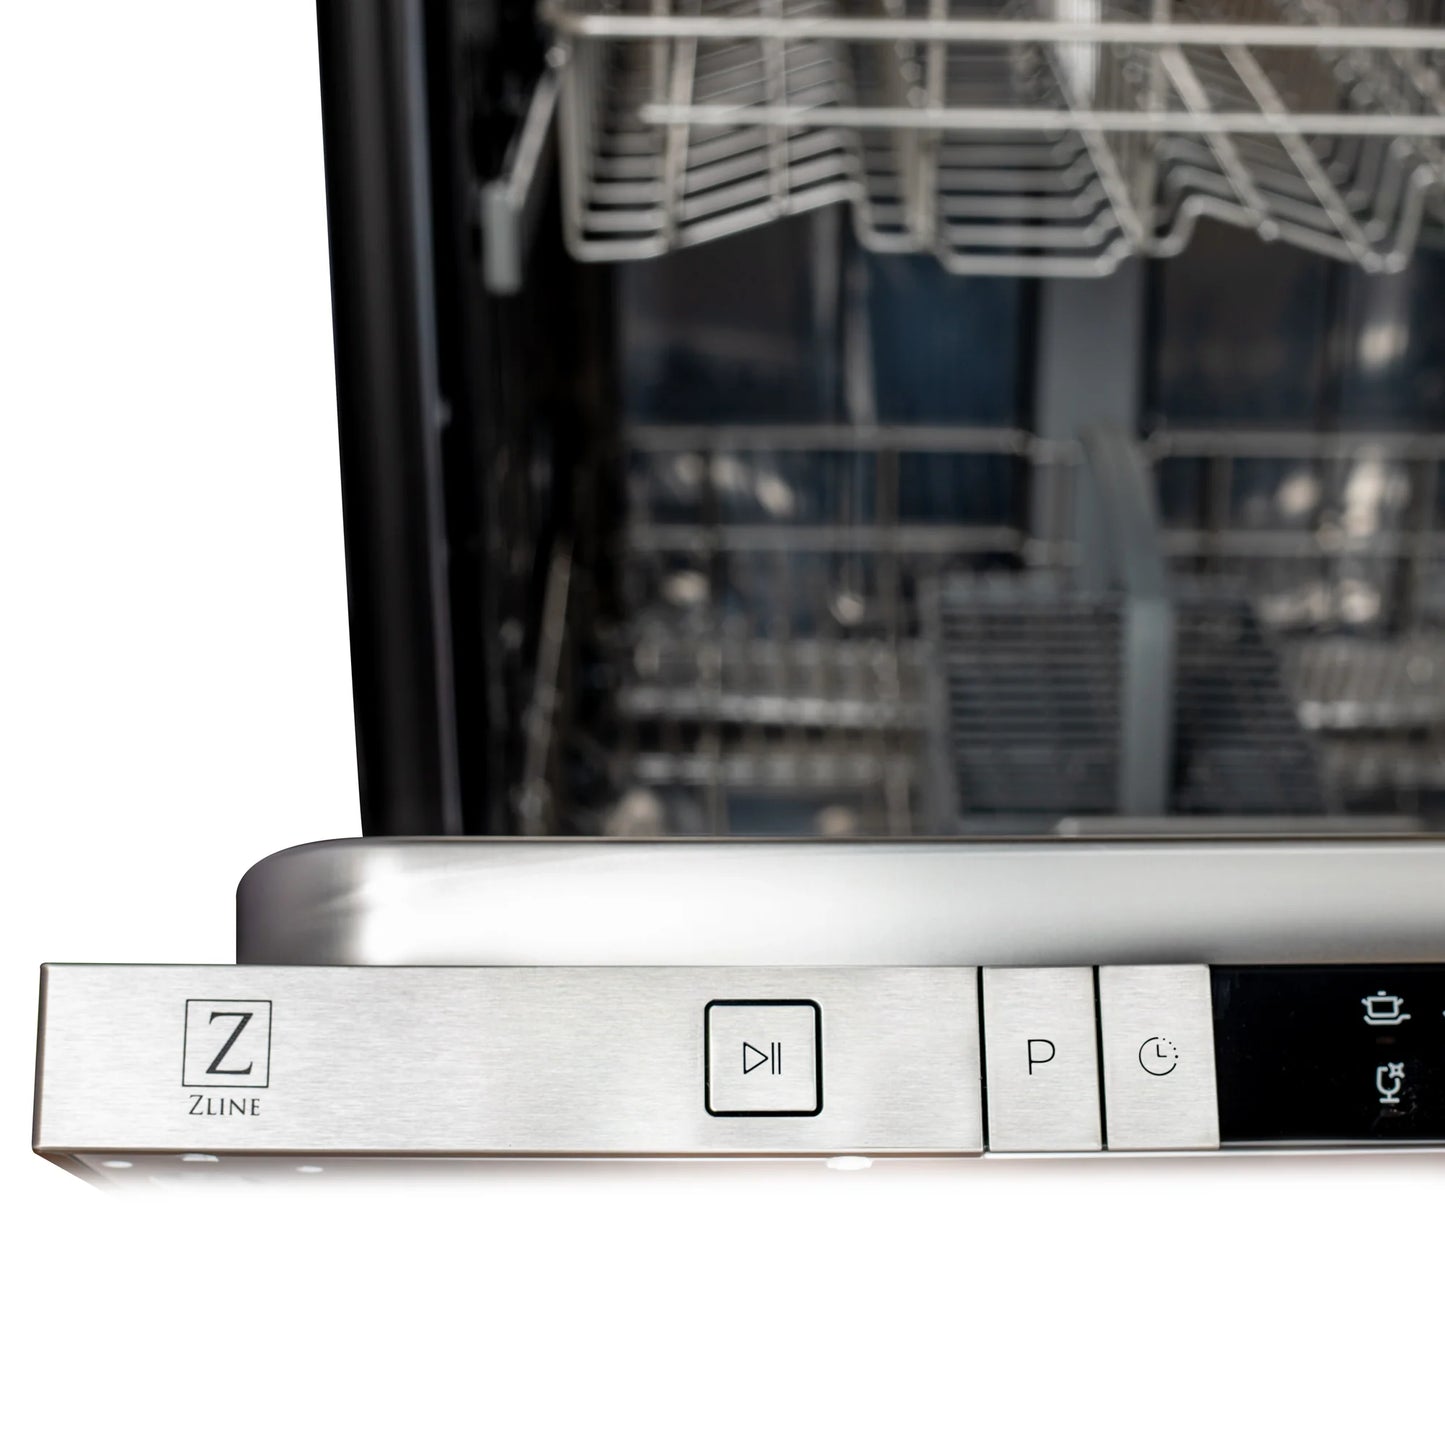 ZLINE 24 in. Compact Top Control Dishwasher with White Matte Panel and Traditional Handle (DW-WM-24)